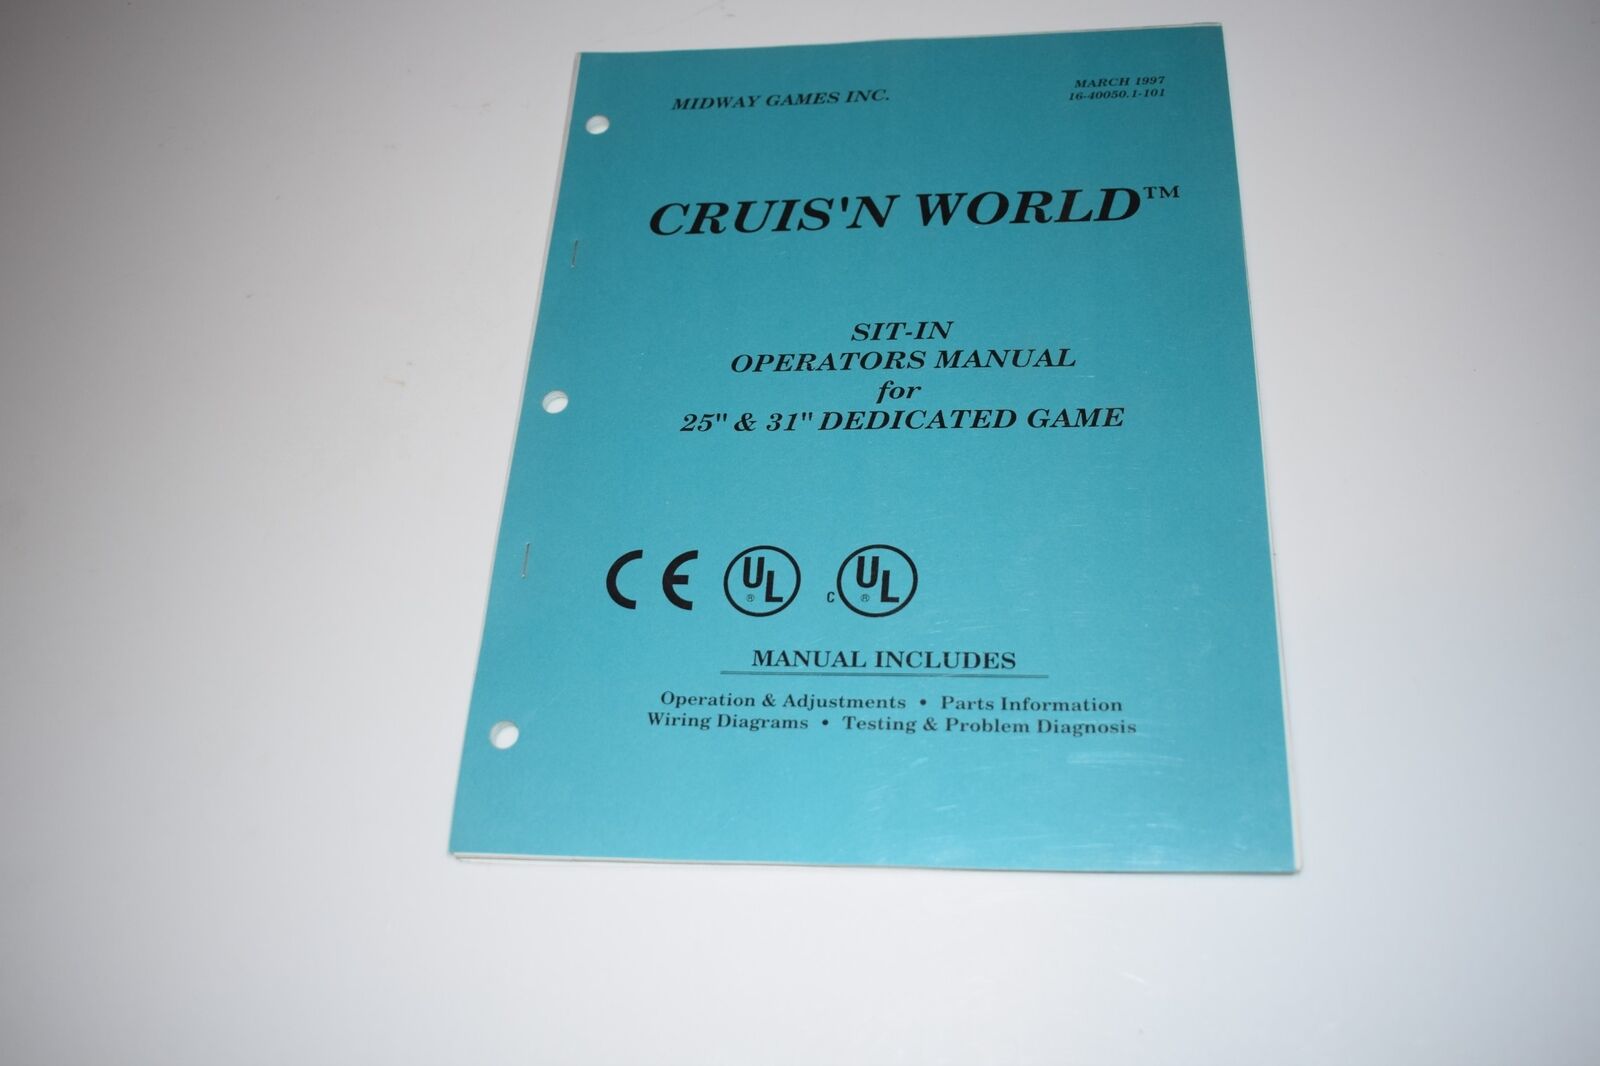 MIDWAY GAMES CRUIS'N WORLD OPERATOR'S MANUAL MARCH 1997 16-40050.1-101 (BOOK779)